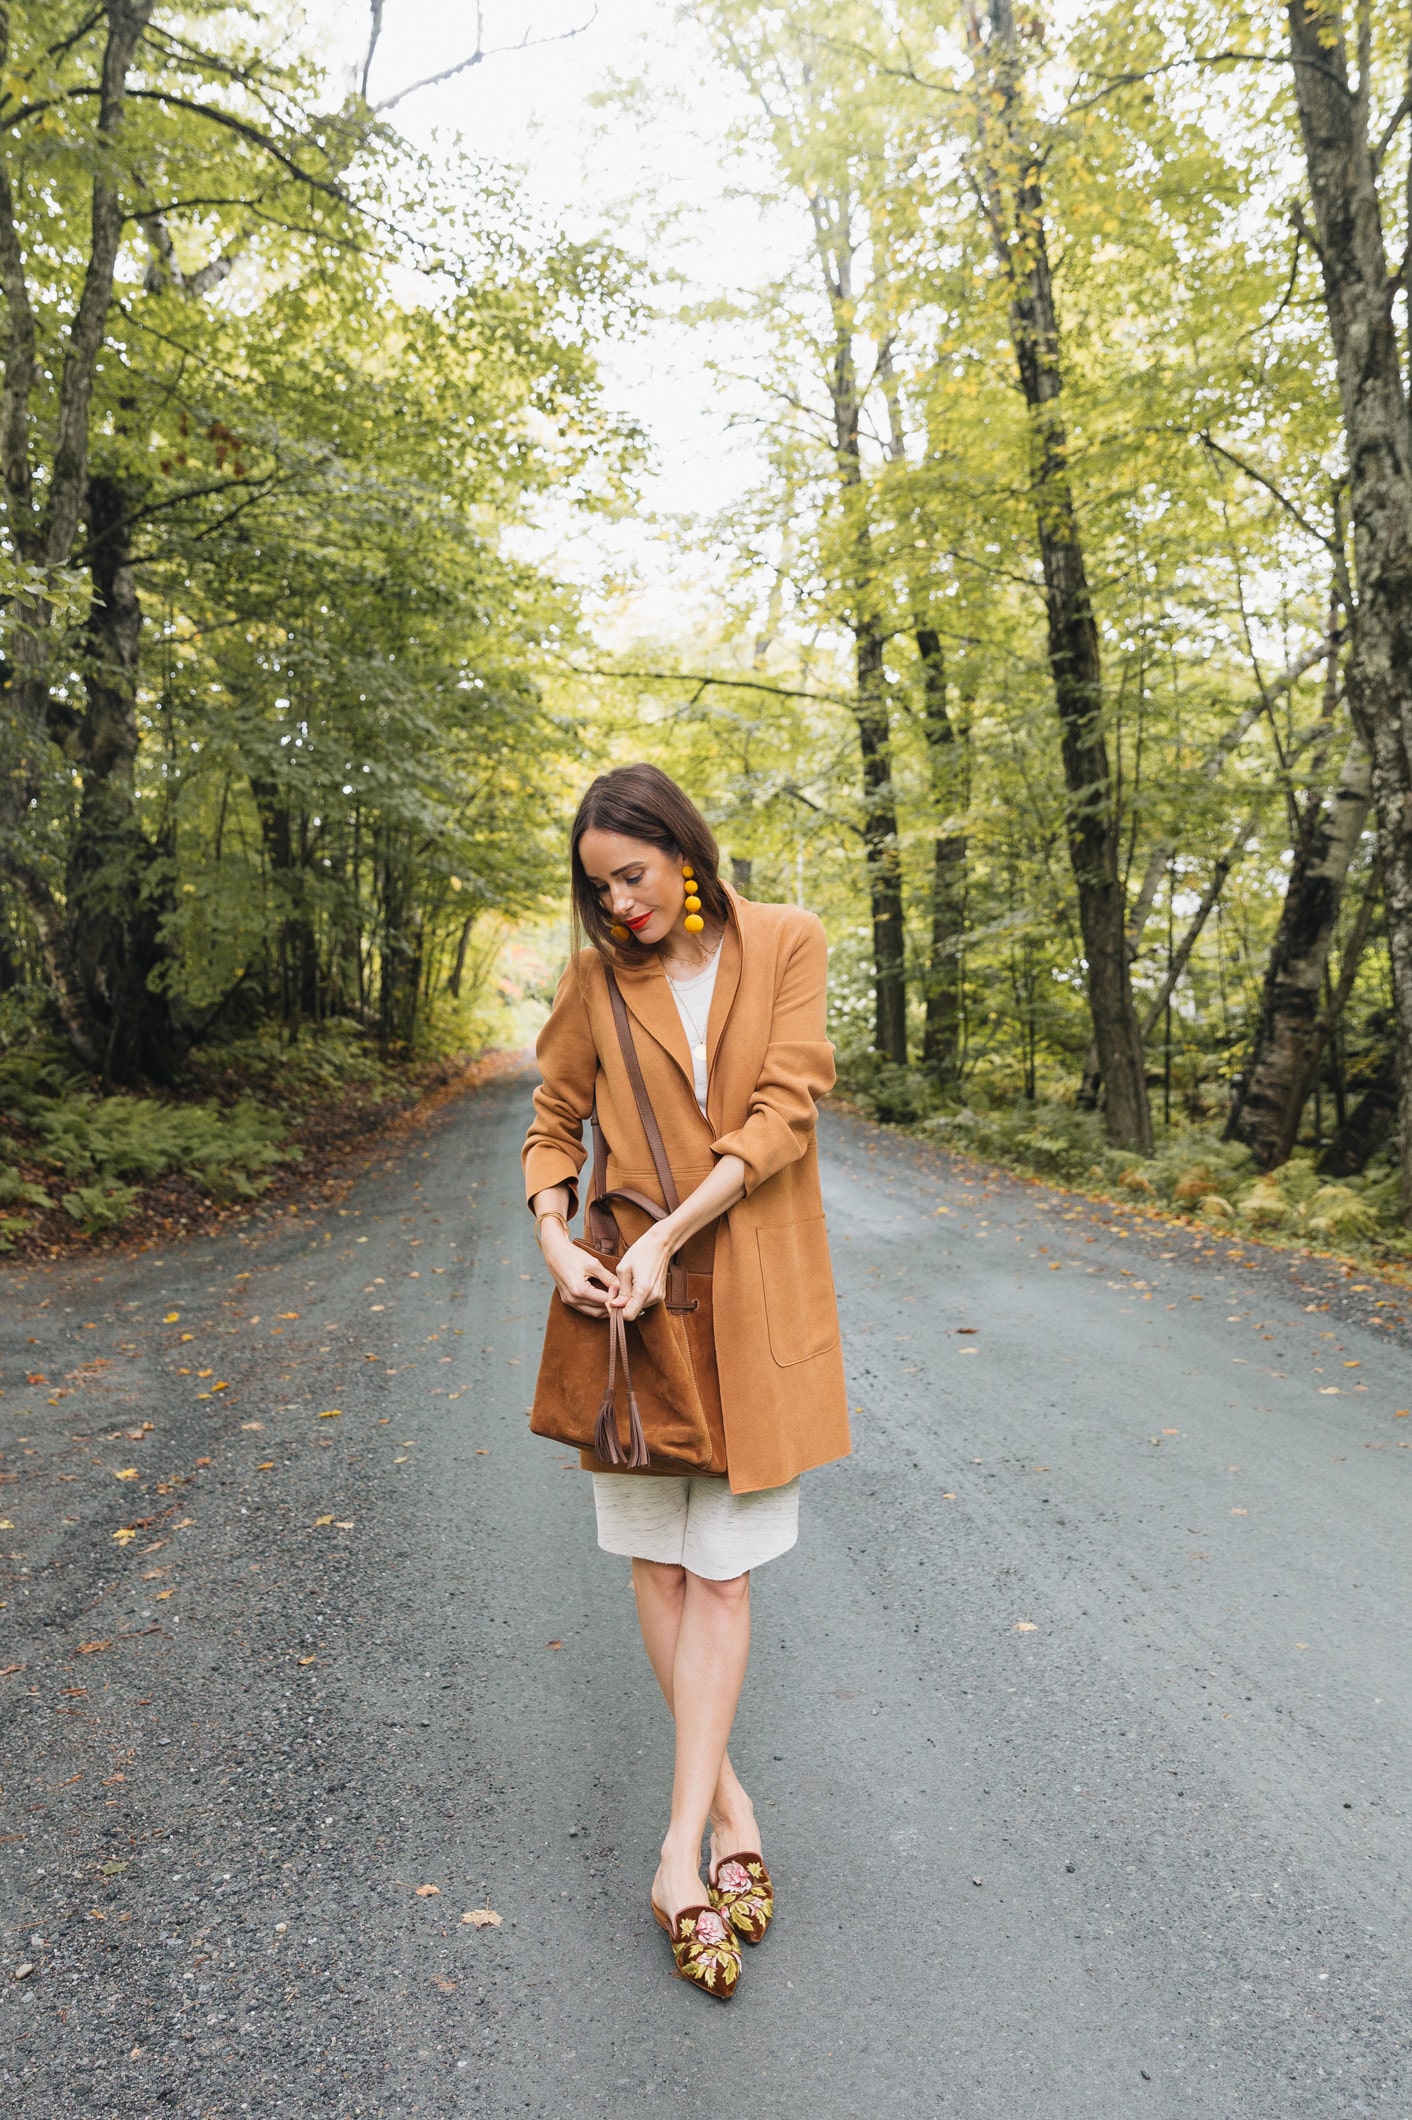 Louise Roe wearing a camel coat for fall in Vermont